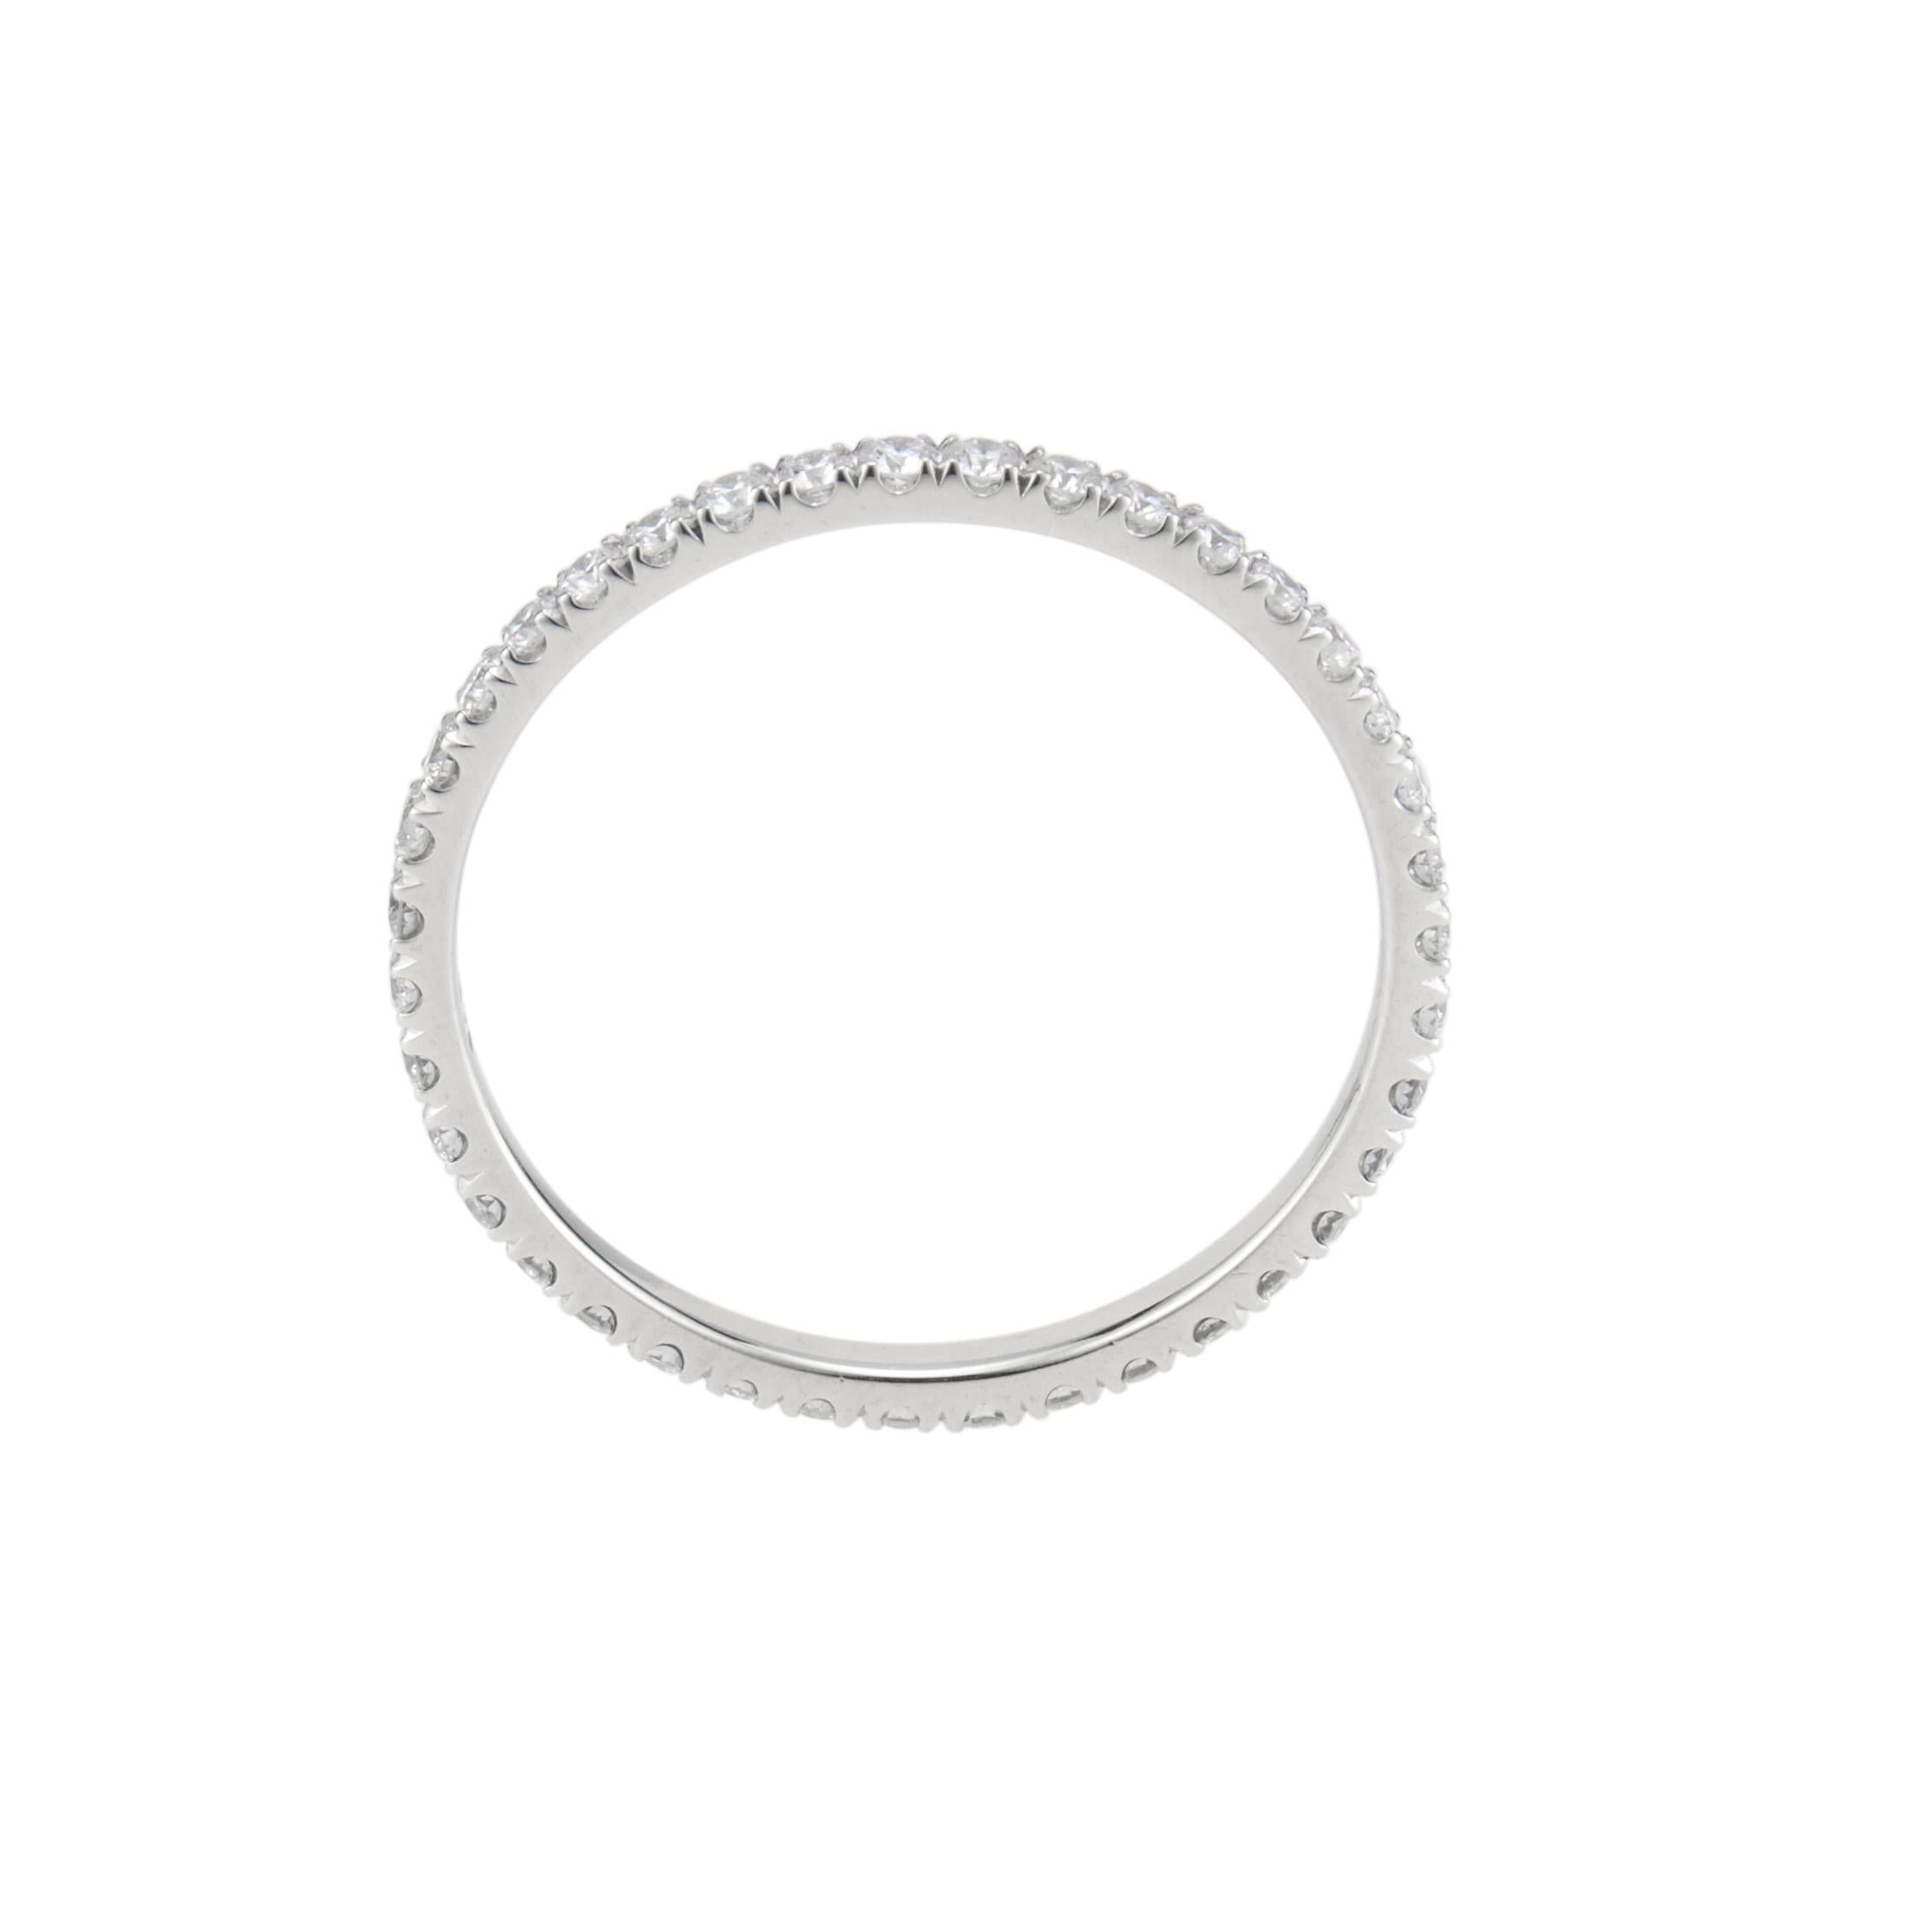 Eternity band wedding ring with .38 carats of bright full cut diamonds in 14k white gold setting. 

38 round brilliant cut diamonds, G VS approx. .38cts
Size 5 and not sizable 
14k white gold 
Stamped: 14k
.8 grams
Width at top: 1.45mm
Height at